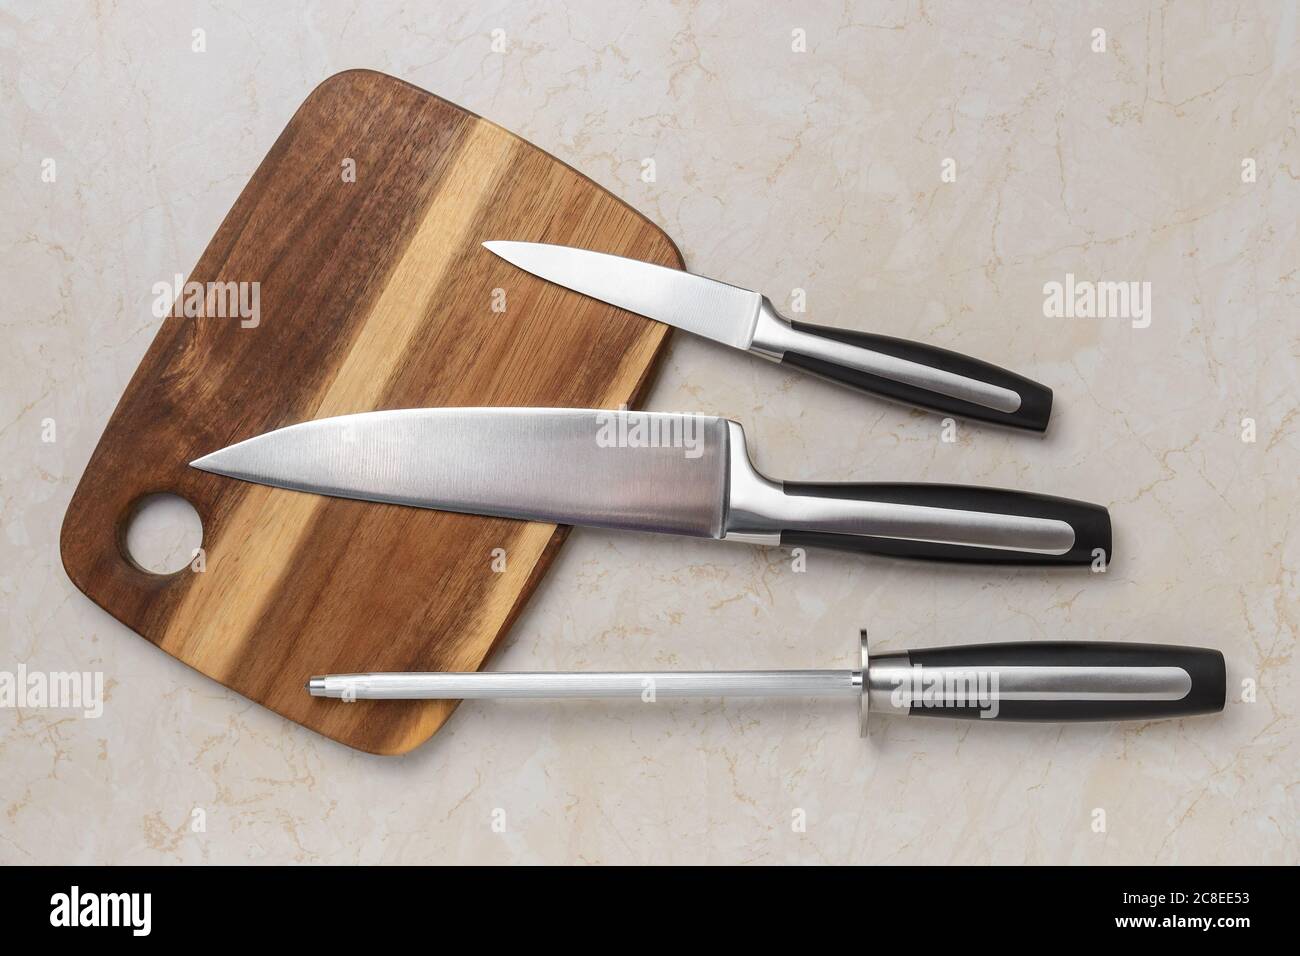 https://c8.alamy.com/comp/2C8EE53/professional-chef-knife-peeling-knife-and-sharpening-steel-on-wood-cutting-board-over-a-kitchen-table-chef-working-tools-modern-kitchen-utensils-2C8EE53.jpg